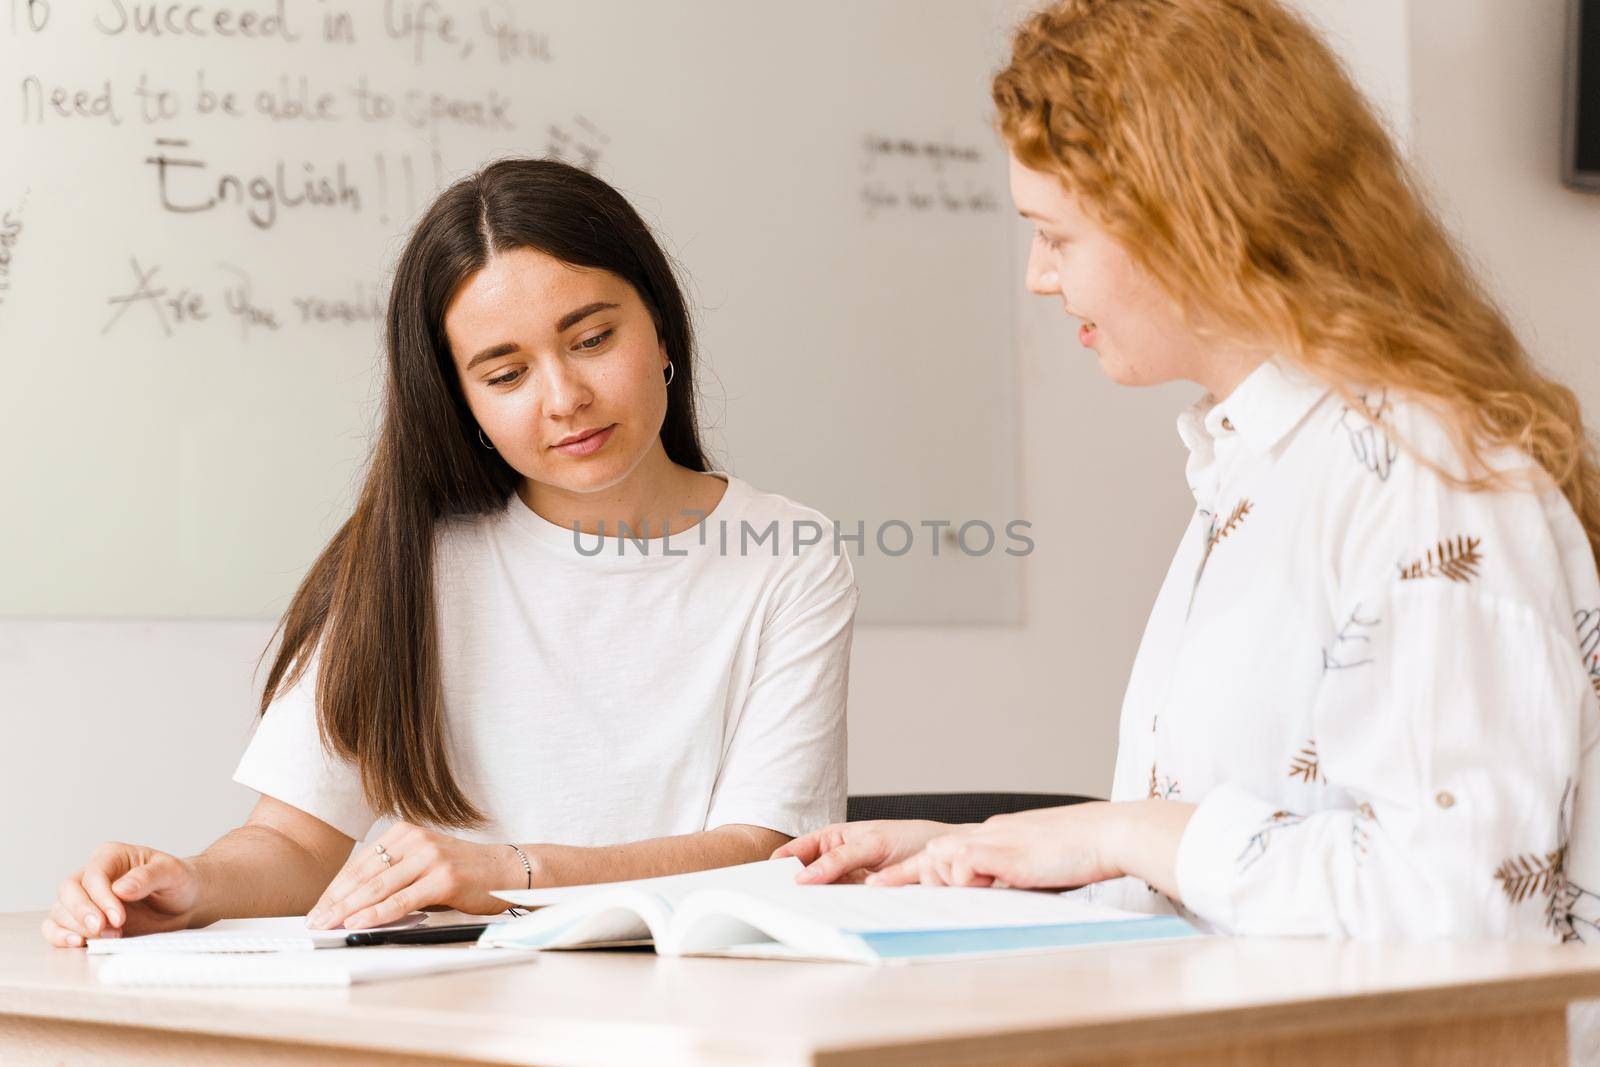 Teacher of english asks student in white class. 2 girls student answers to teacher. Working in group. Study english and british language by Rabizo